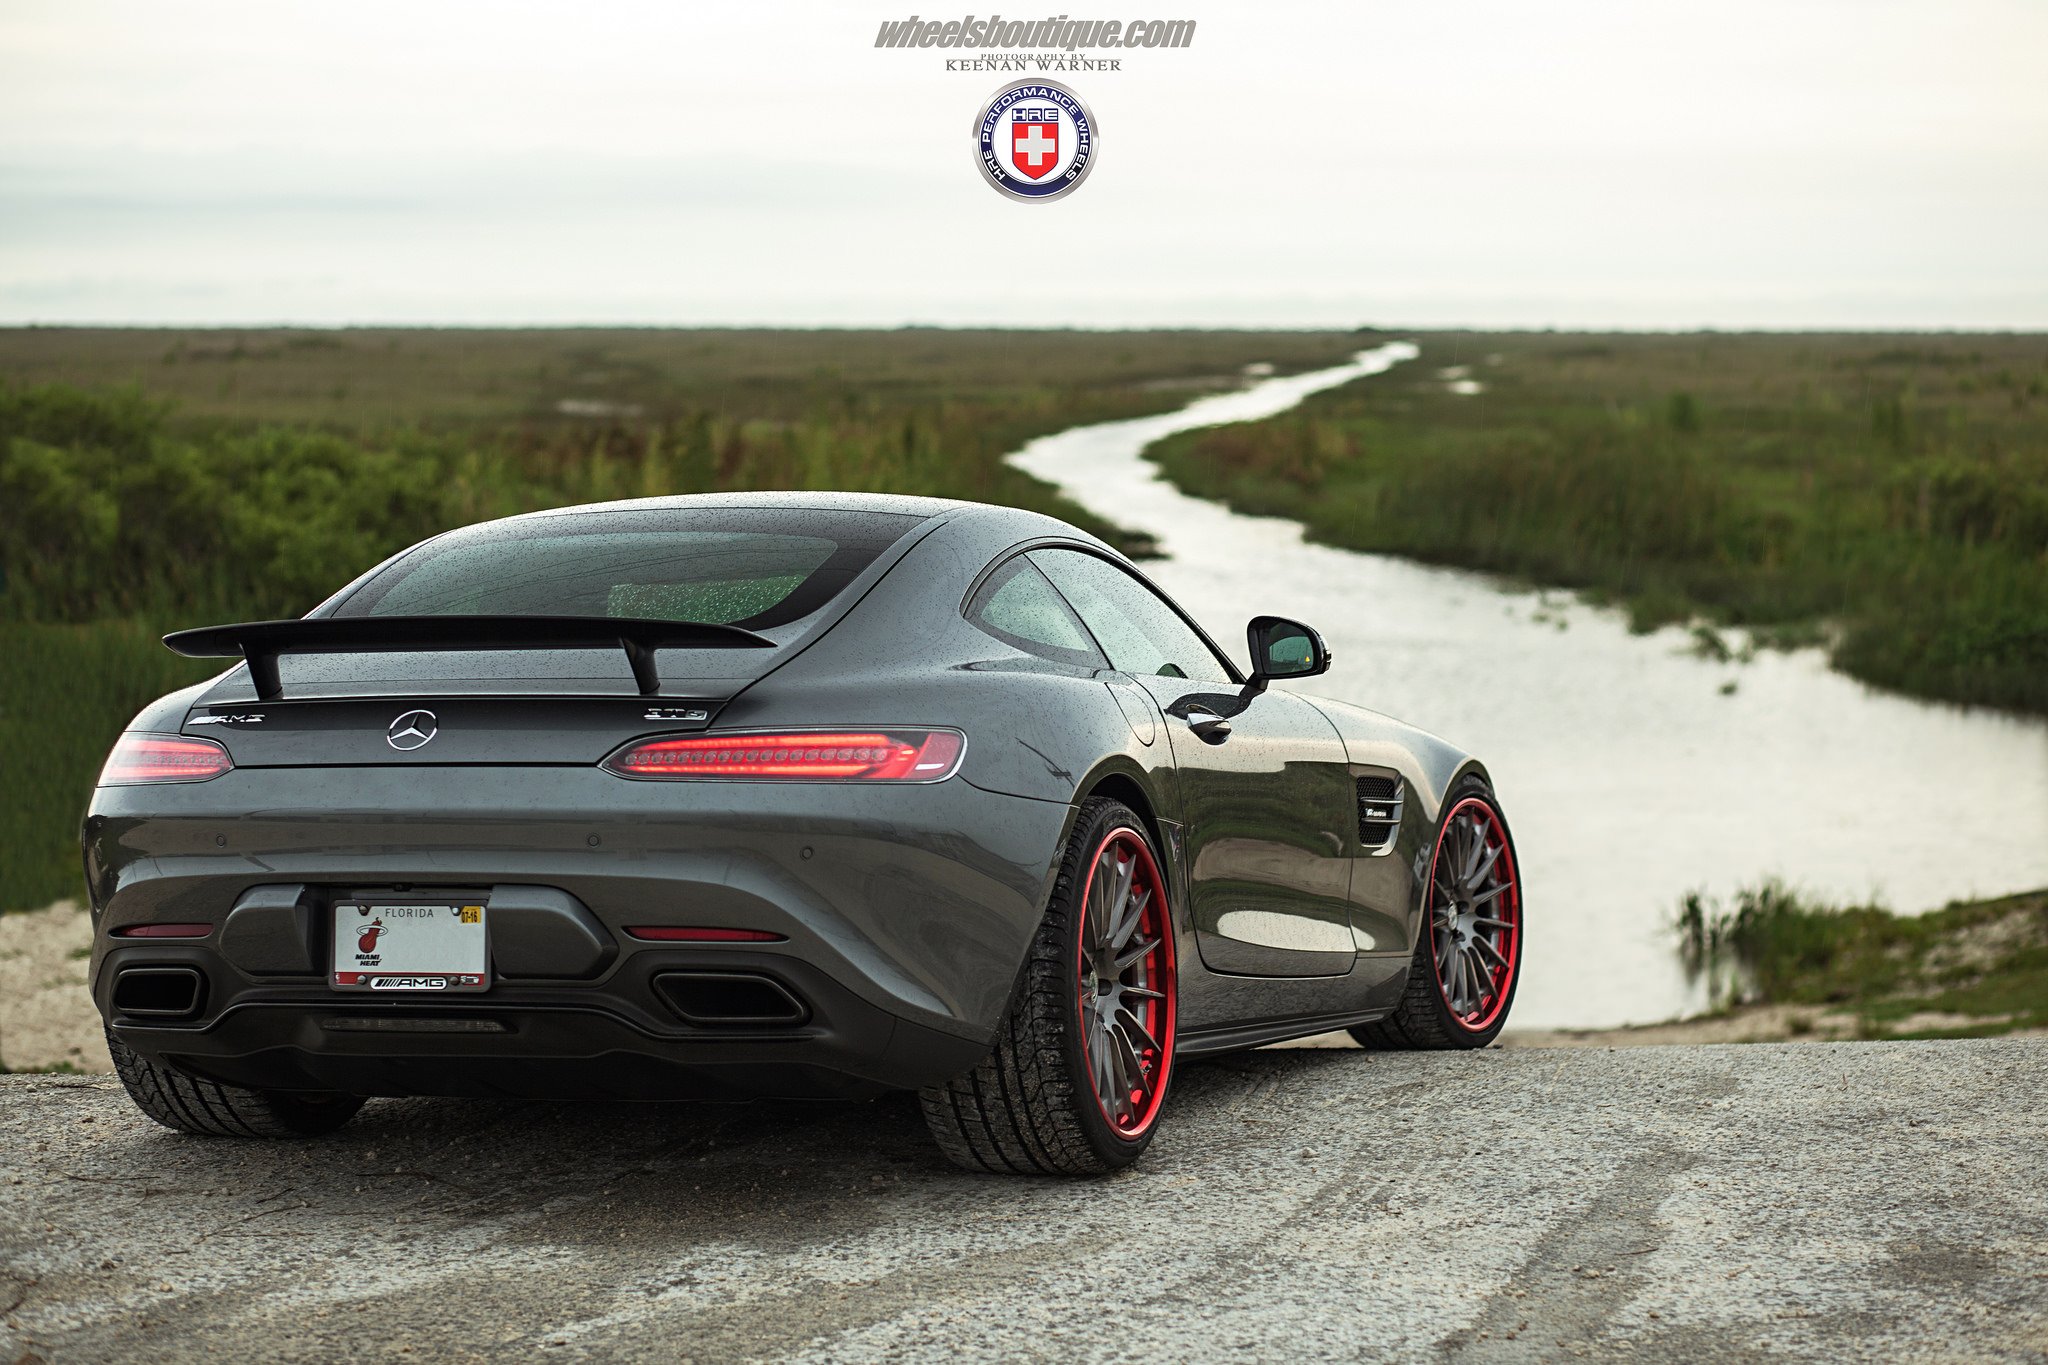 mercedes, Amg, Gts, Hre, Wheels, Cars, Coupe Wallpaper